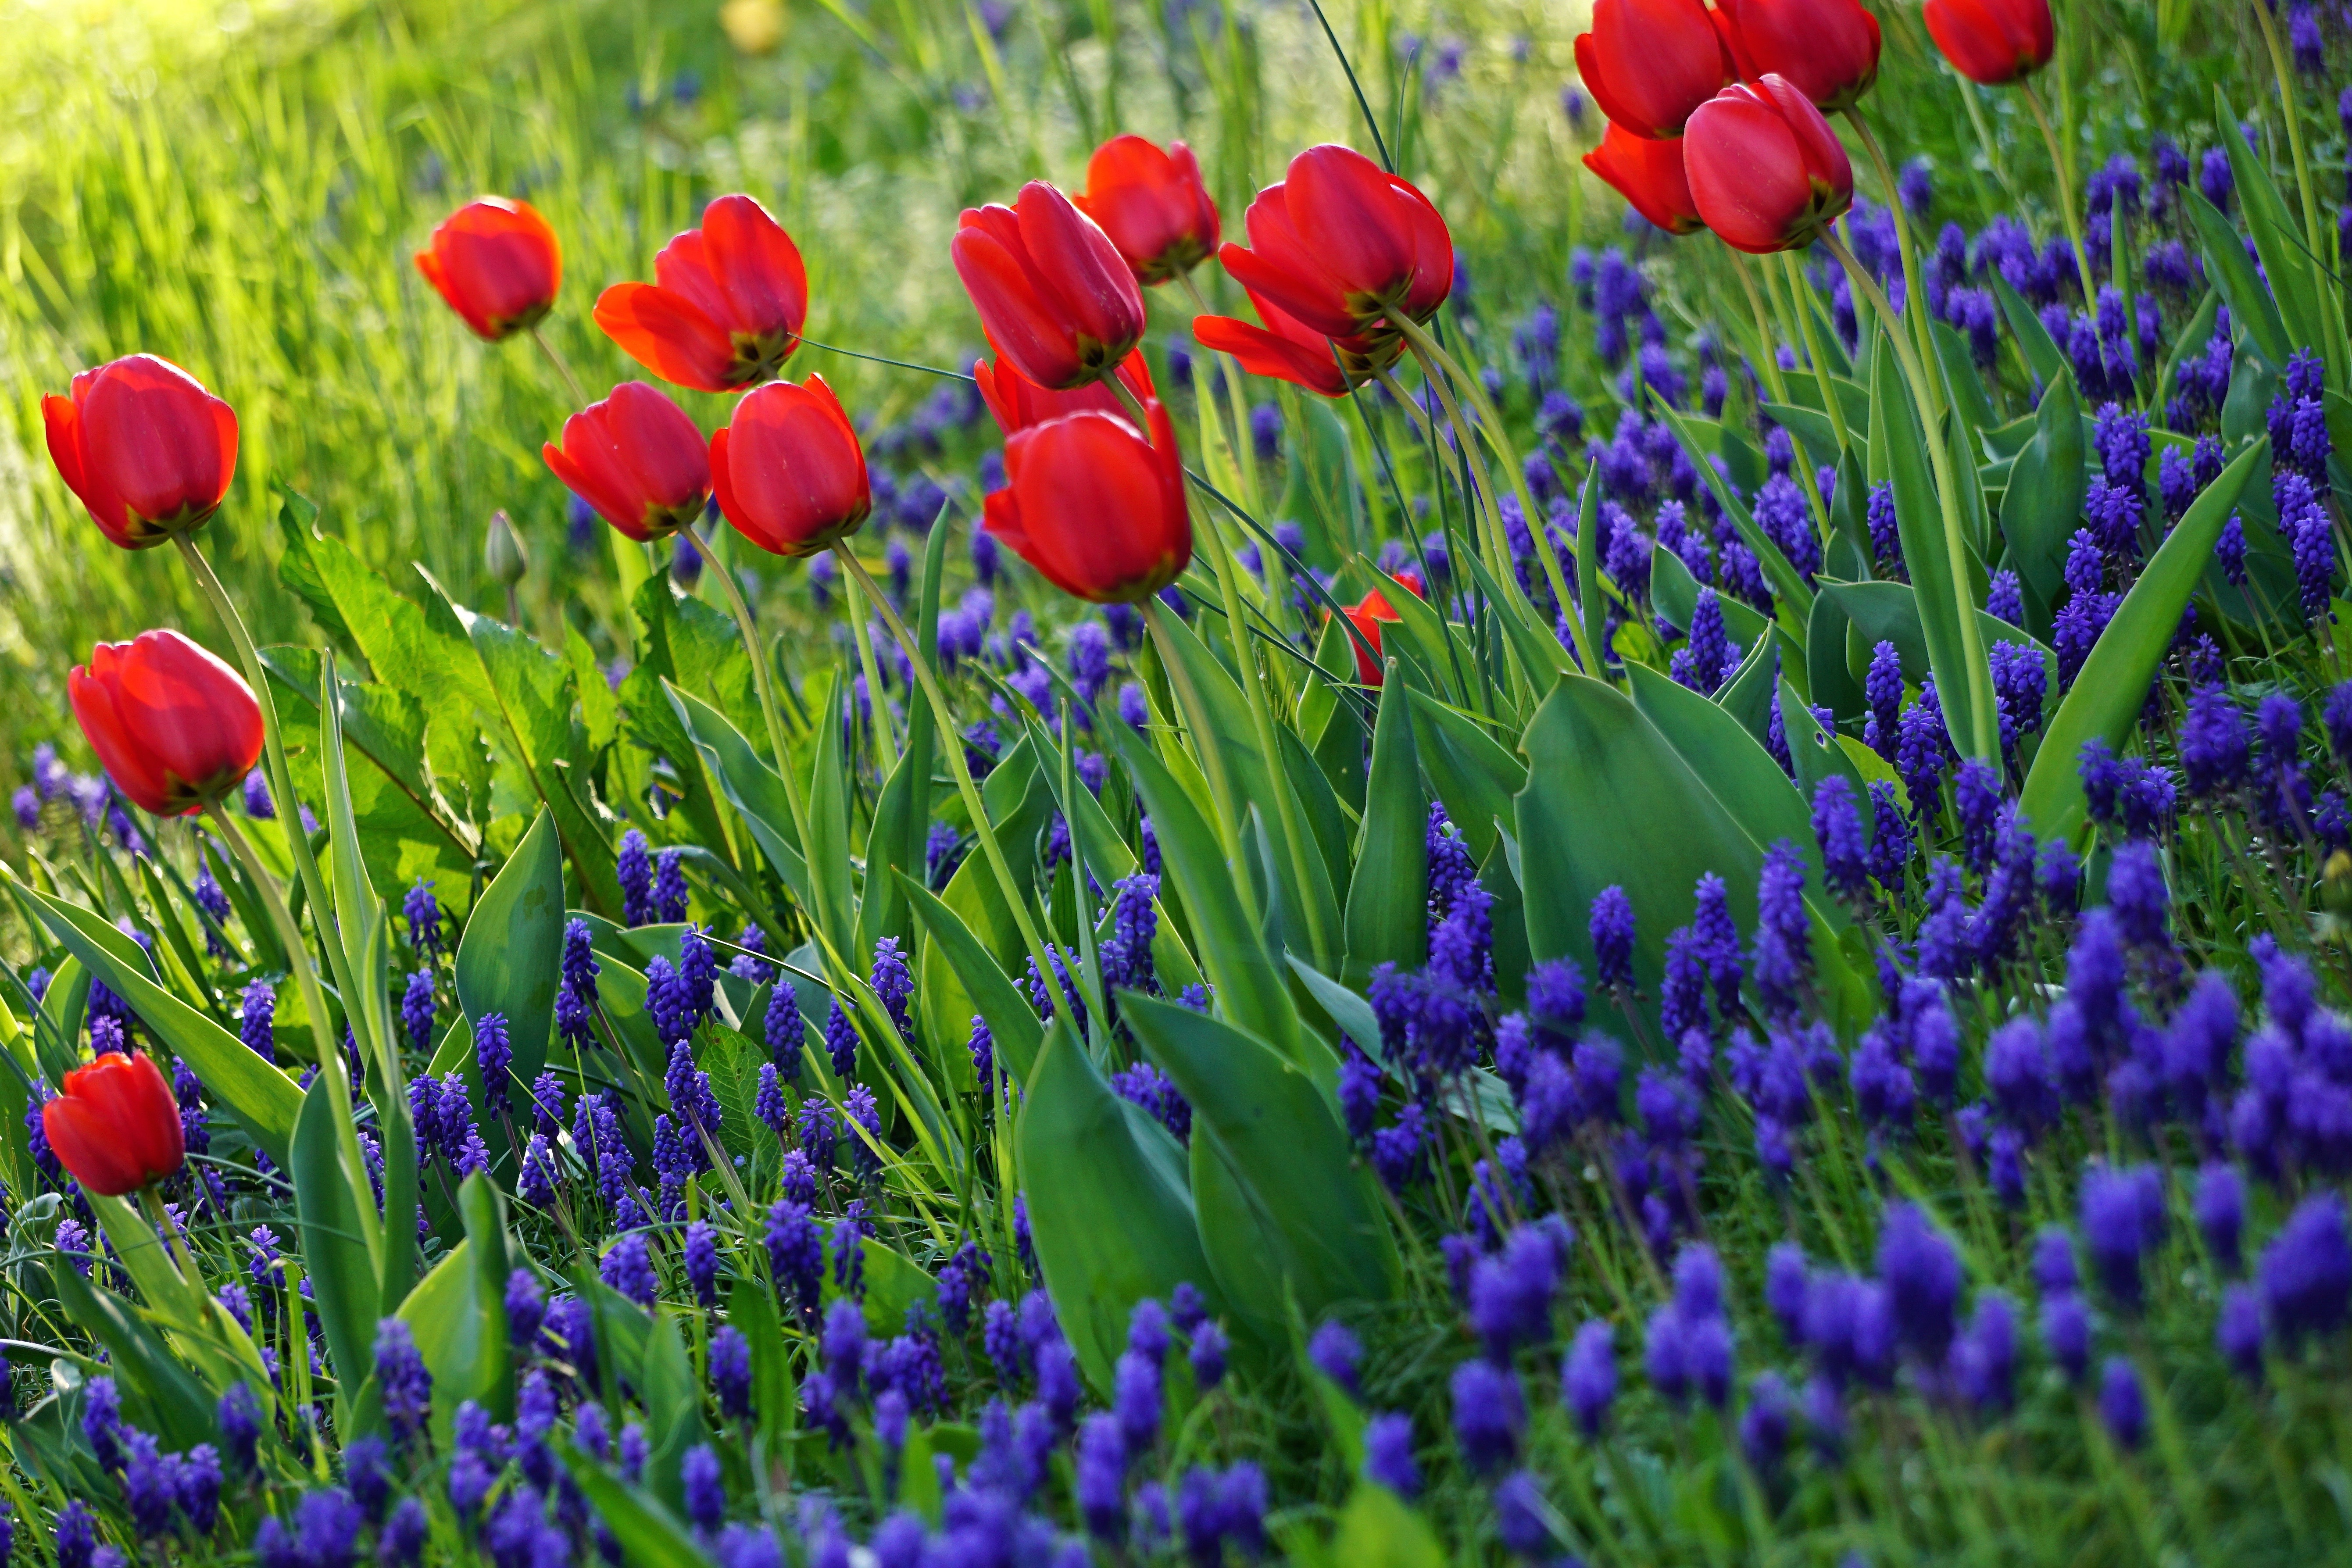 flowers, grass, tulips, bloom, flowering High Definition image